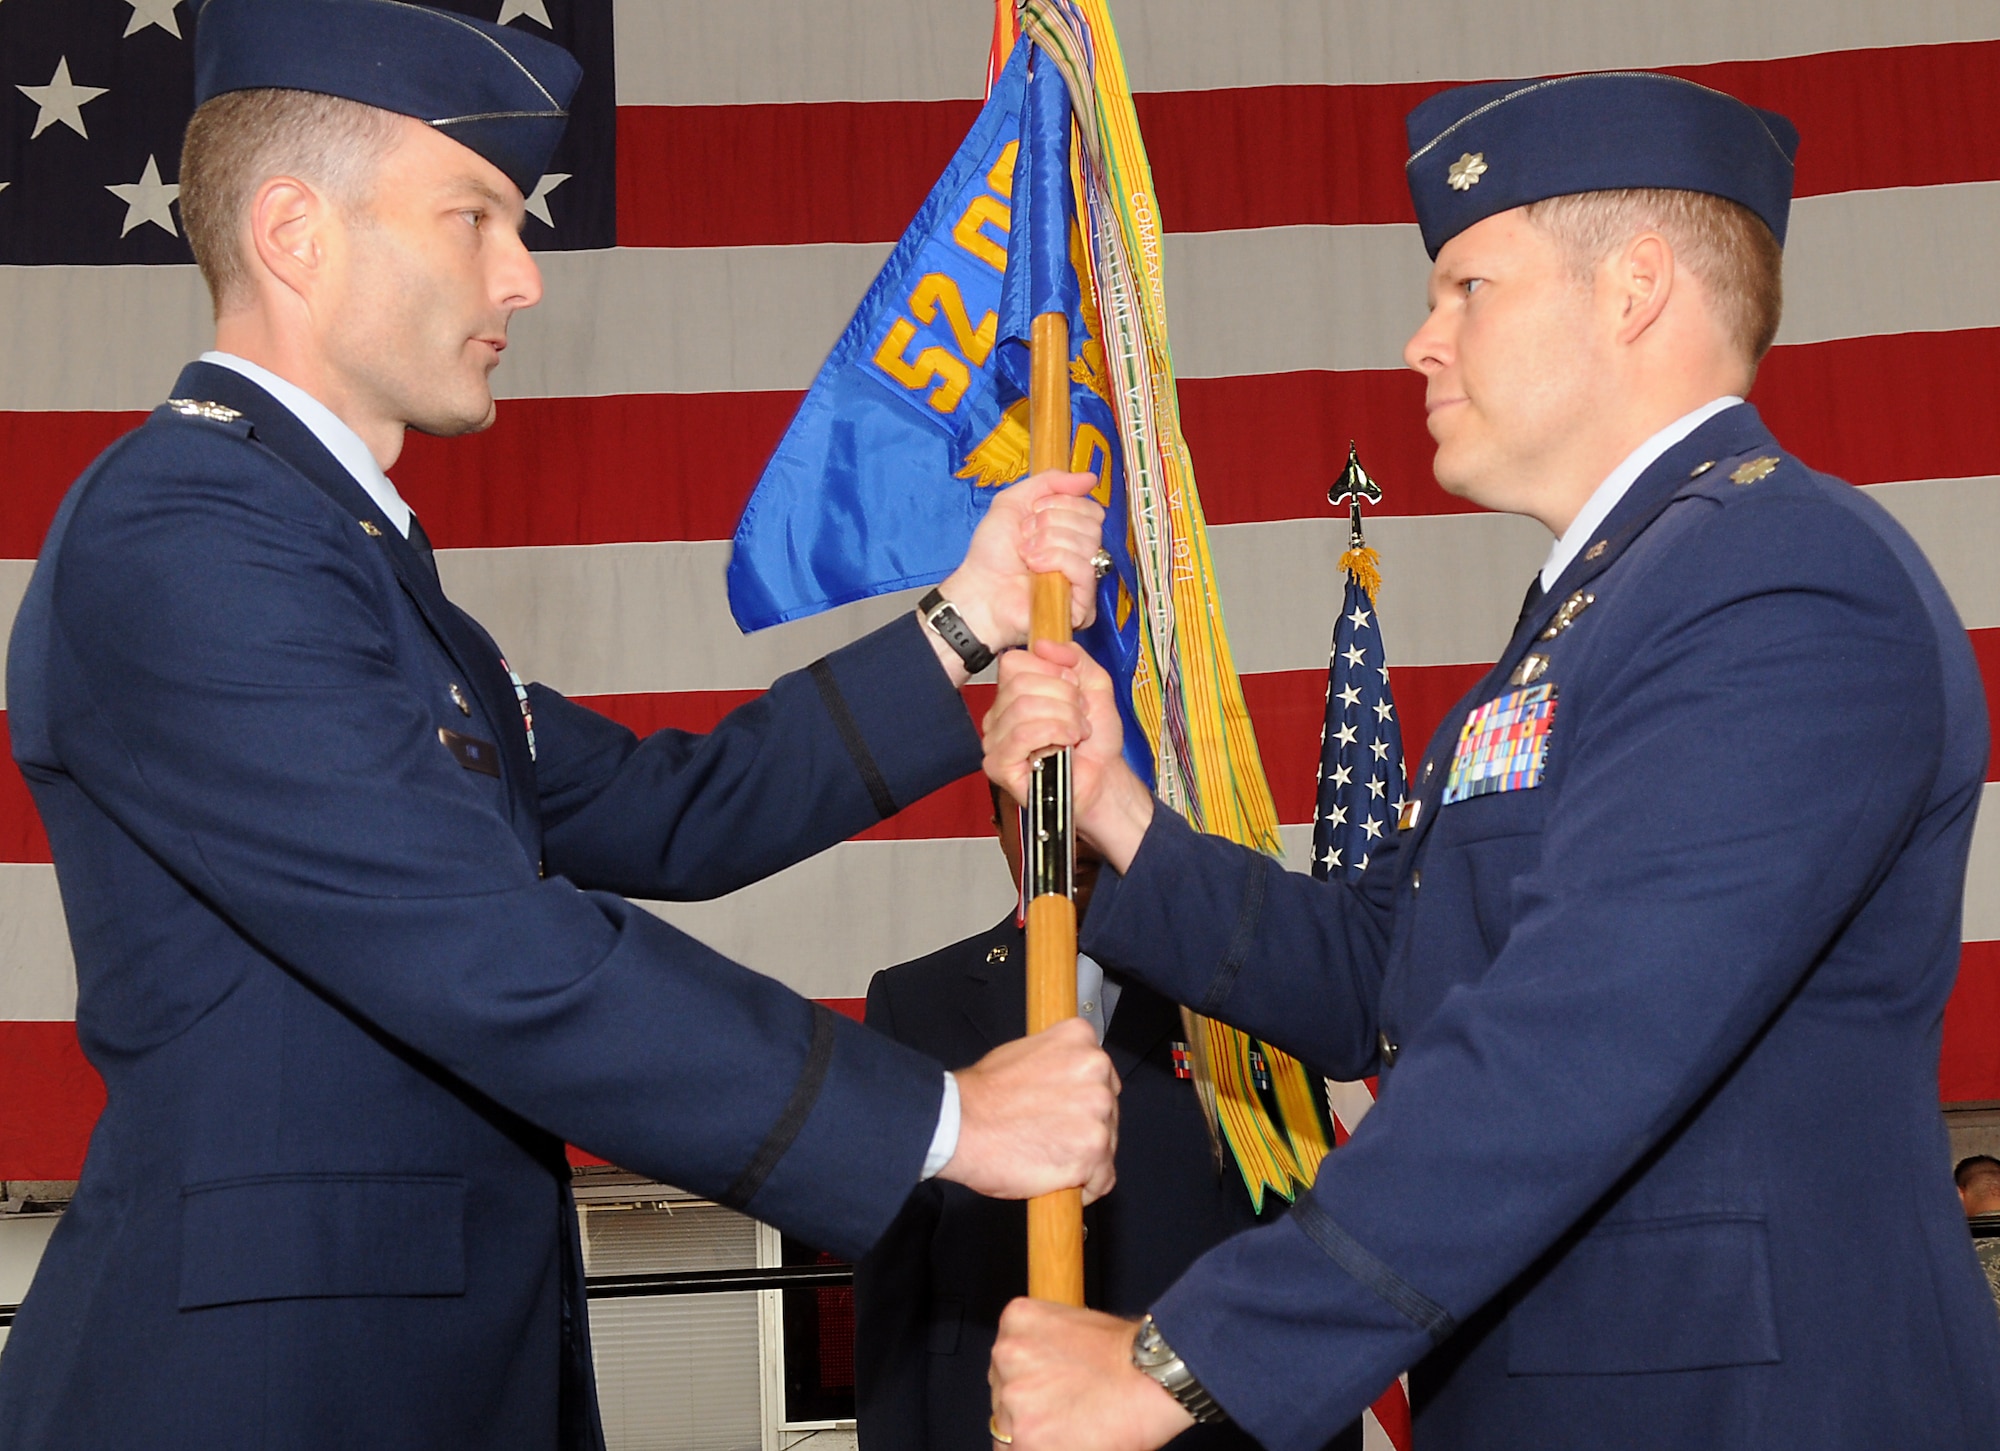 SPANGDAHLEM AIR BASE, Germany—Col. Jackson Fox, 52nd Operations Group commander presents the 480th Fighter Squadron guidon to Lt. Col. Andrew Wolcott, 480th FS commander, as he assumes command Aug. 13.  The 480th is Spangdahlem’s newest F-16 Fighting Falcon squadron, and took on the motto “From Escardrille to Warhawks” to signify its geographical ties to the Lafayette Escadrille in France. Prior to America’s entry into World War I, 38 American pilots volunteered to fly for the French Aéronautique militaire in April 1916 and are known as America’s first fighter aircraft aviators.  (U.S. Air Force photo/Staff Sgt. Logan Tuttle)